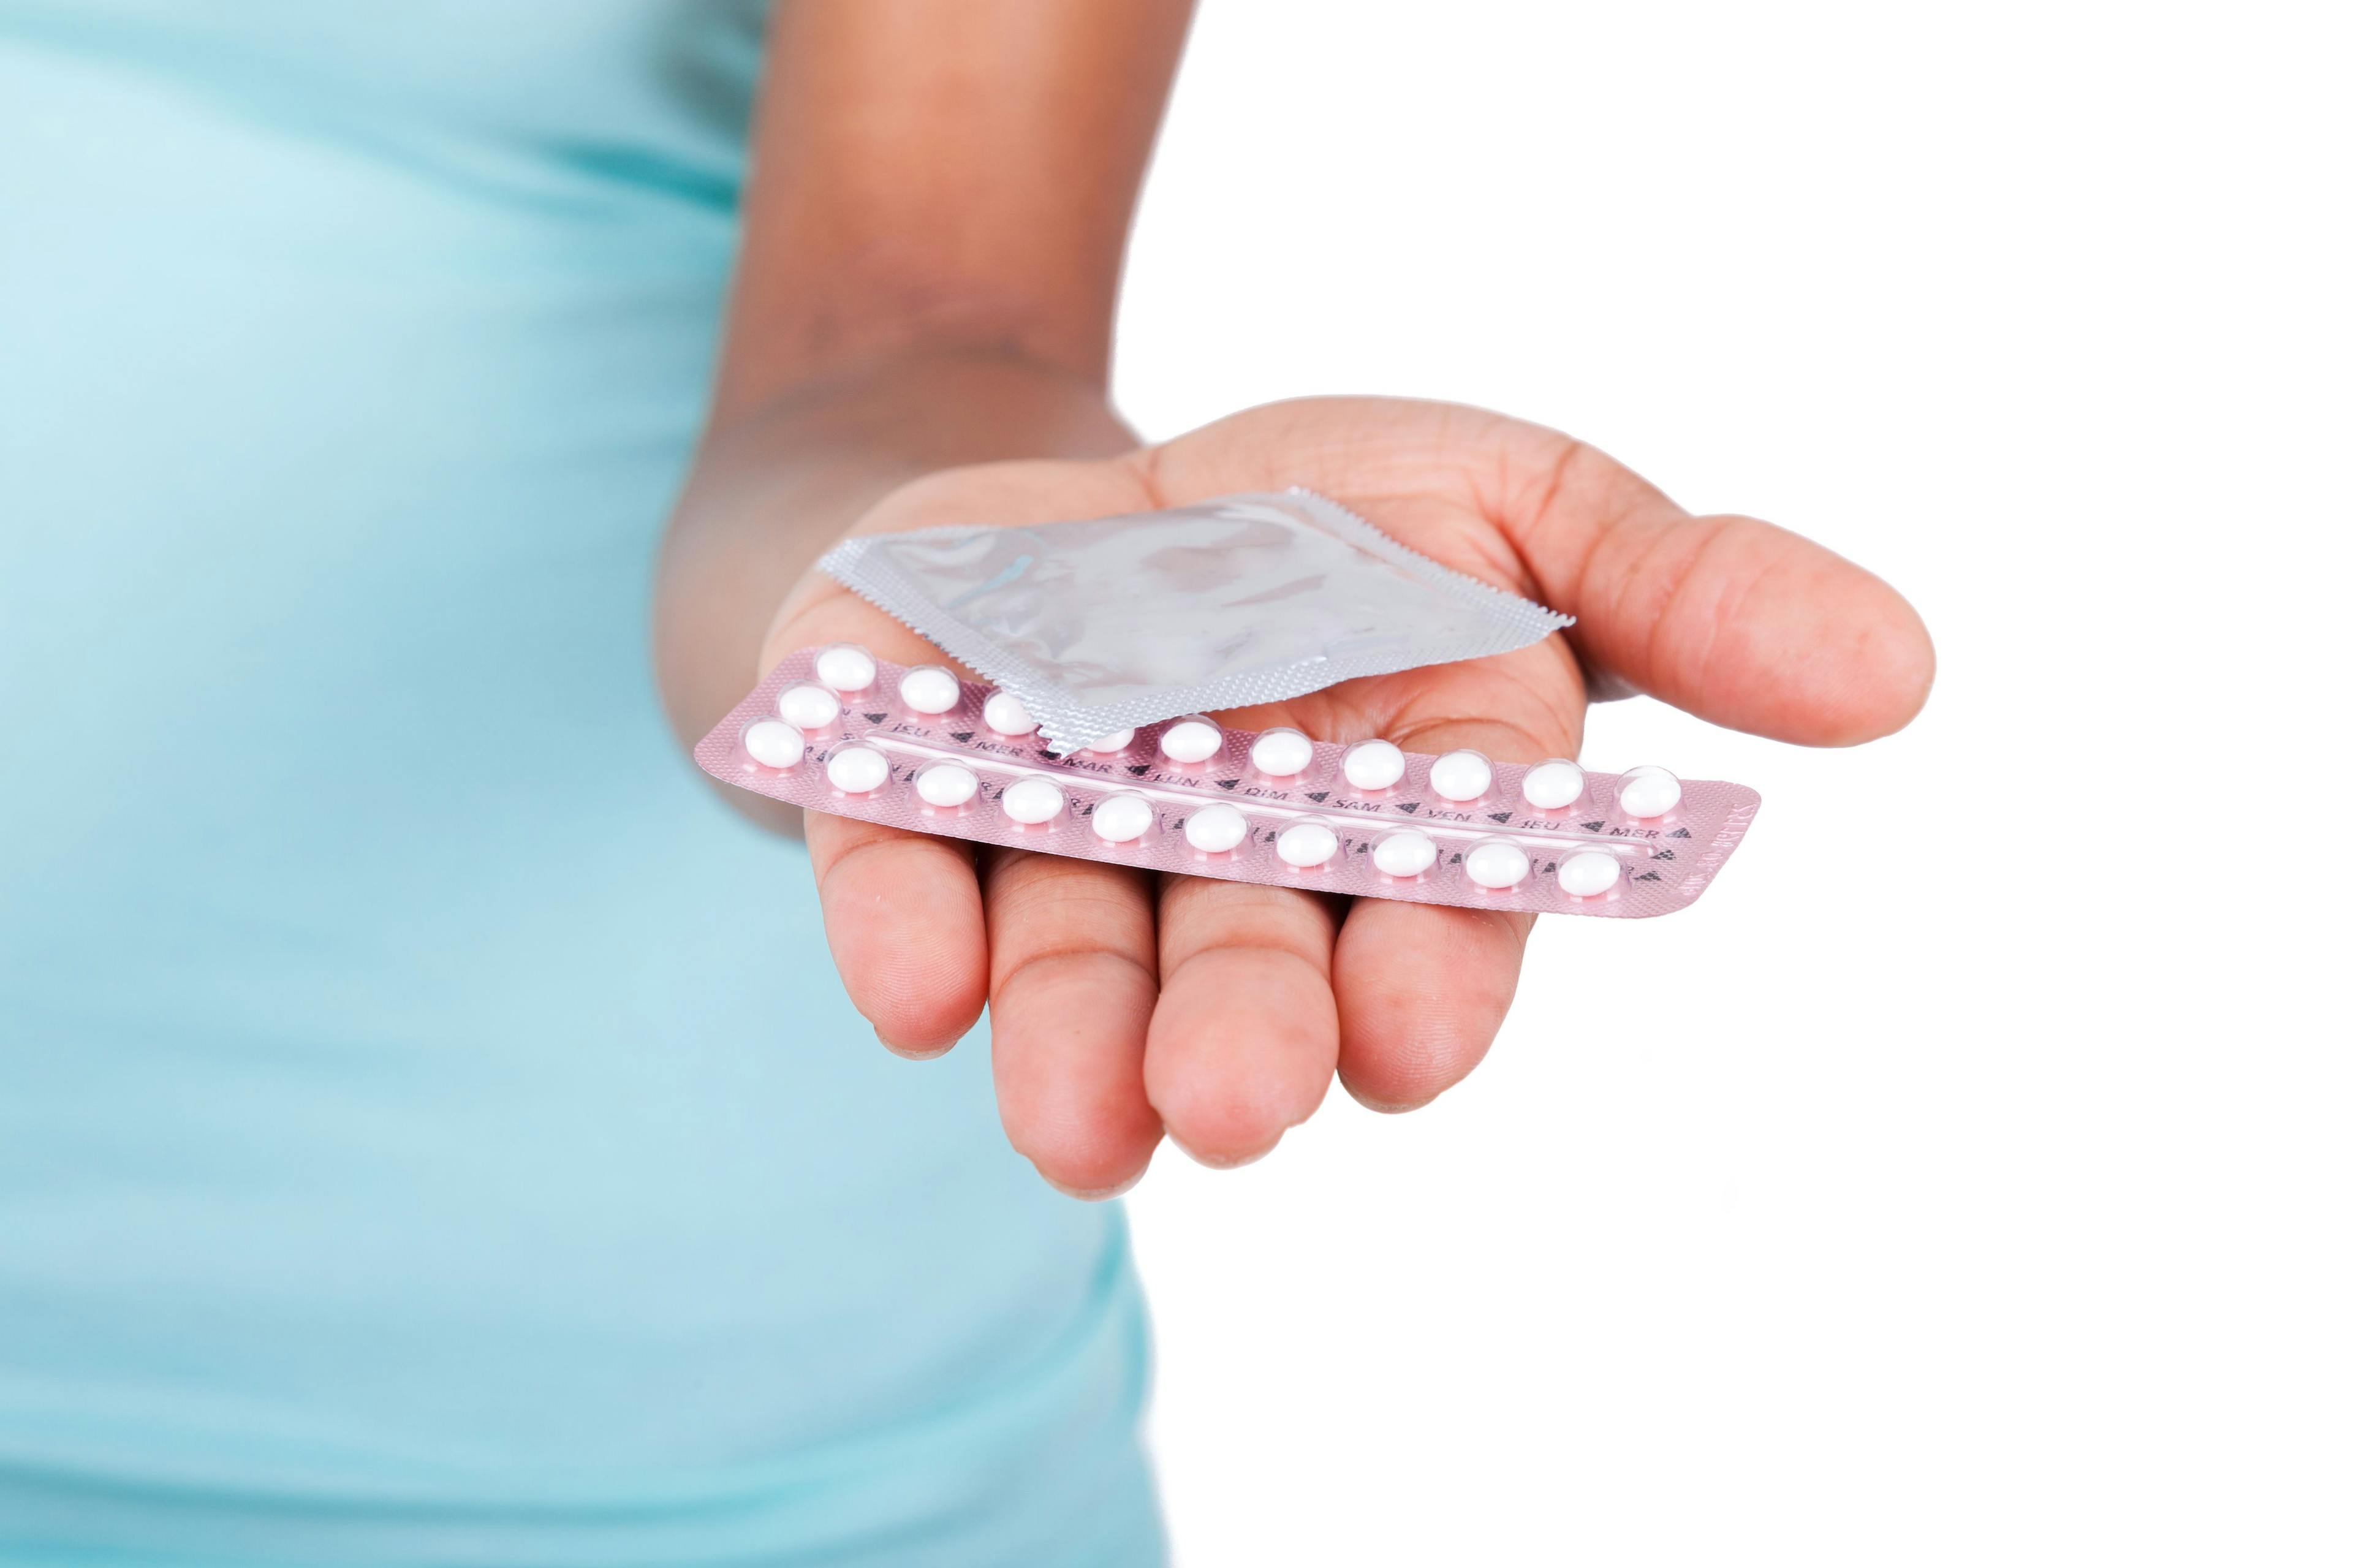 Efficacy of combined oral contraceptives for treating depression in premenstrual women 